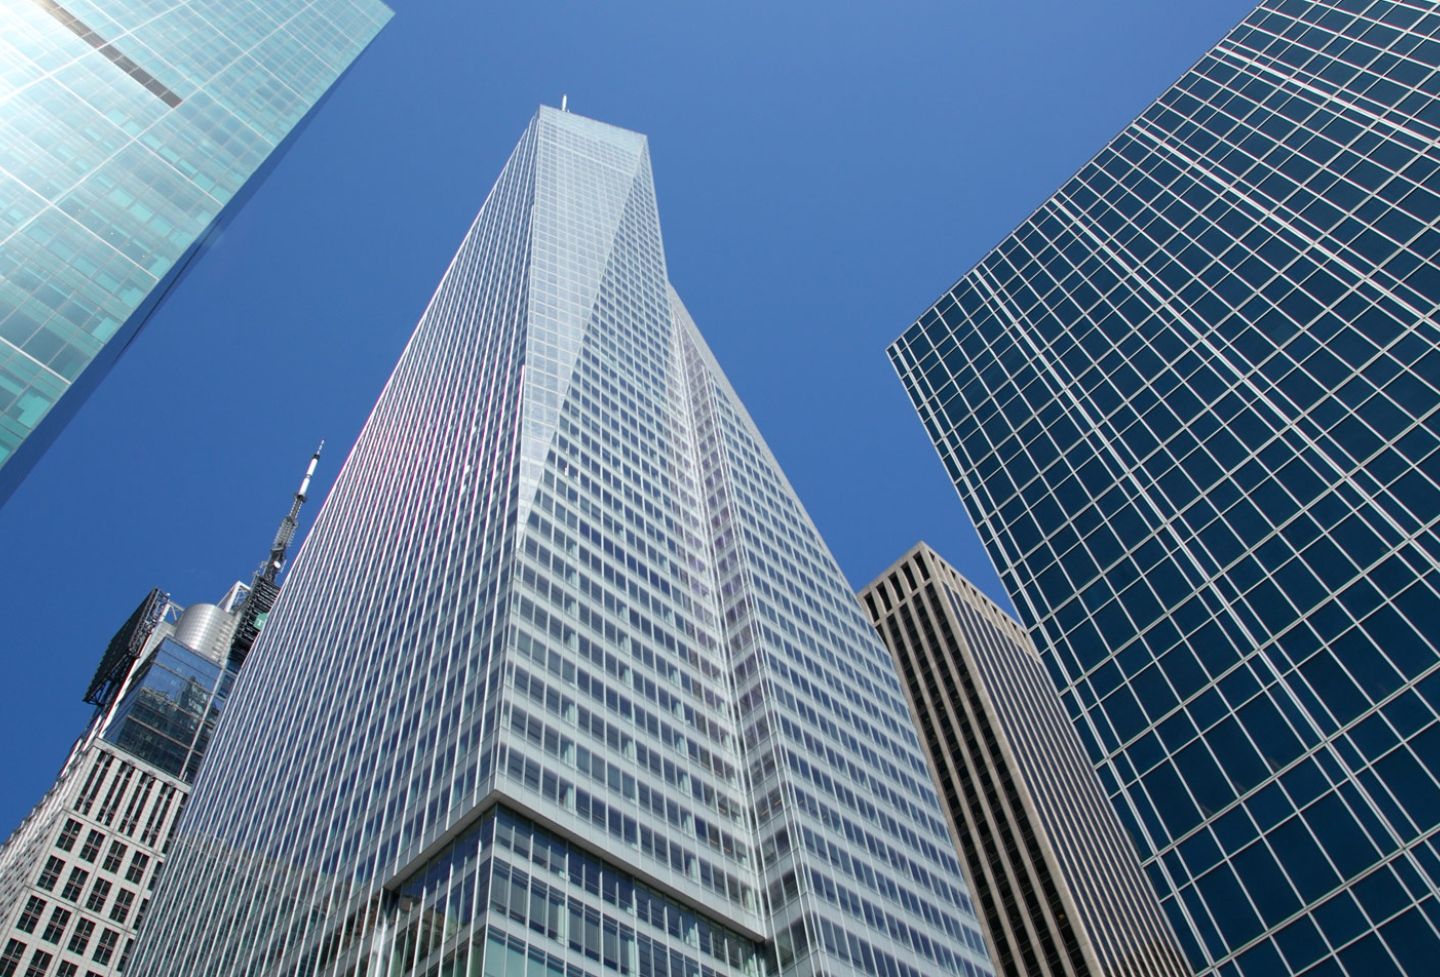 Image of skyscrapers